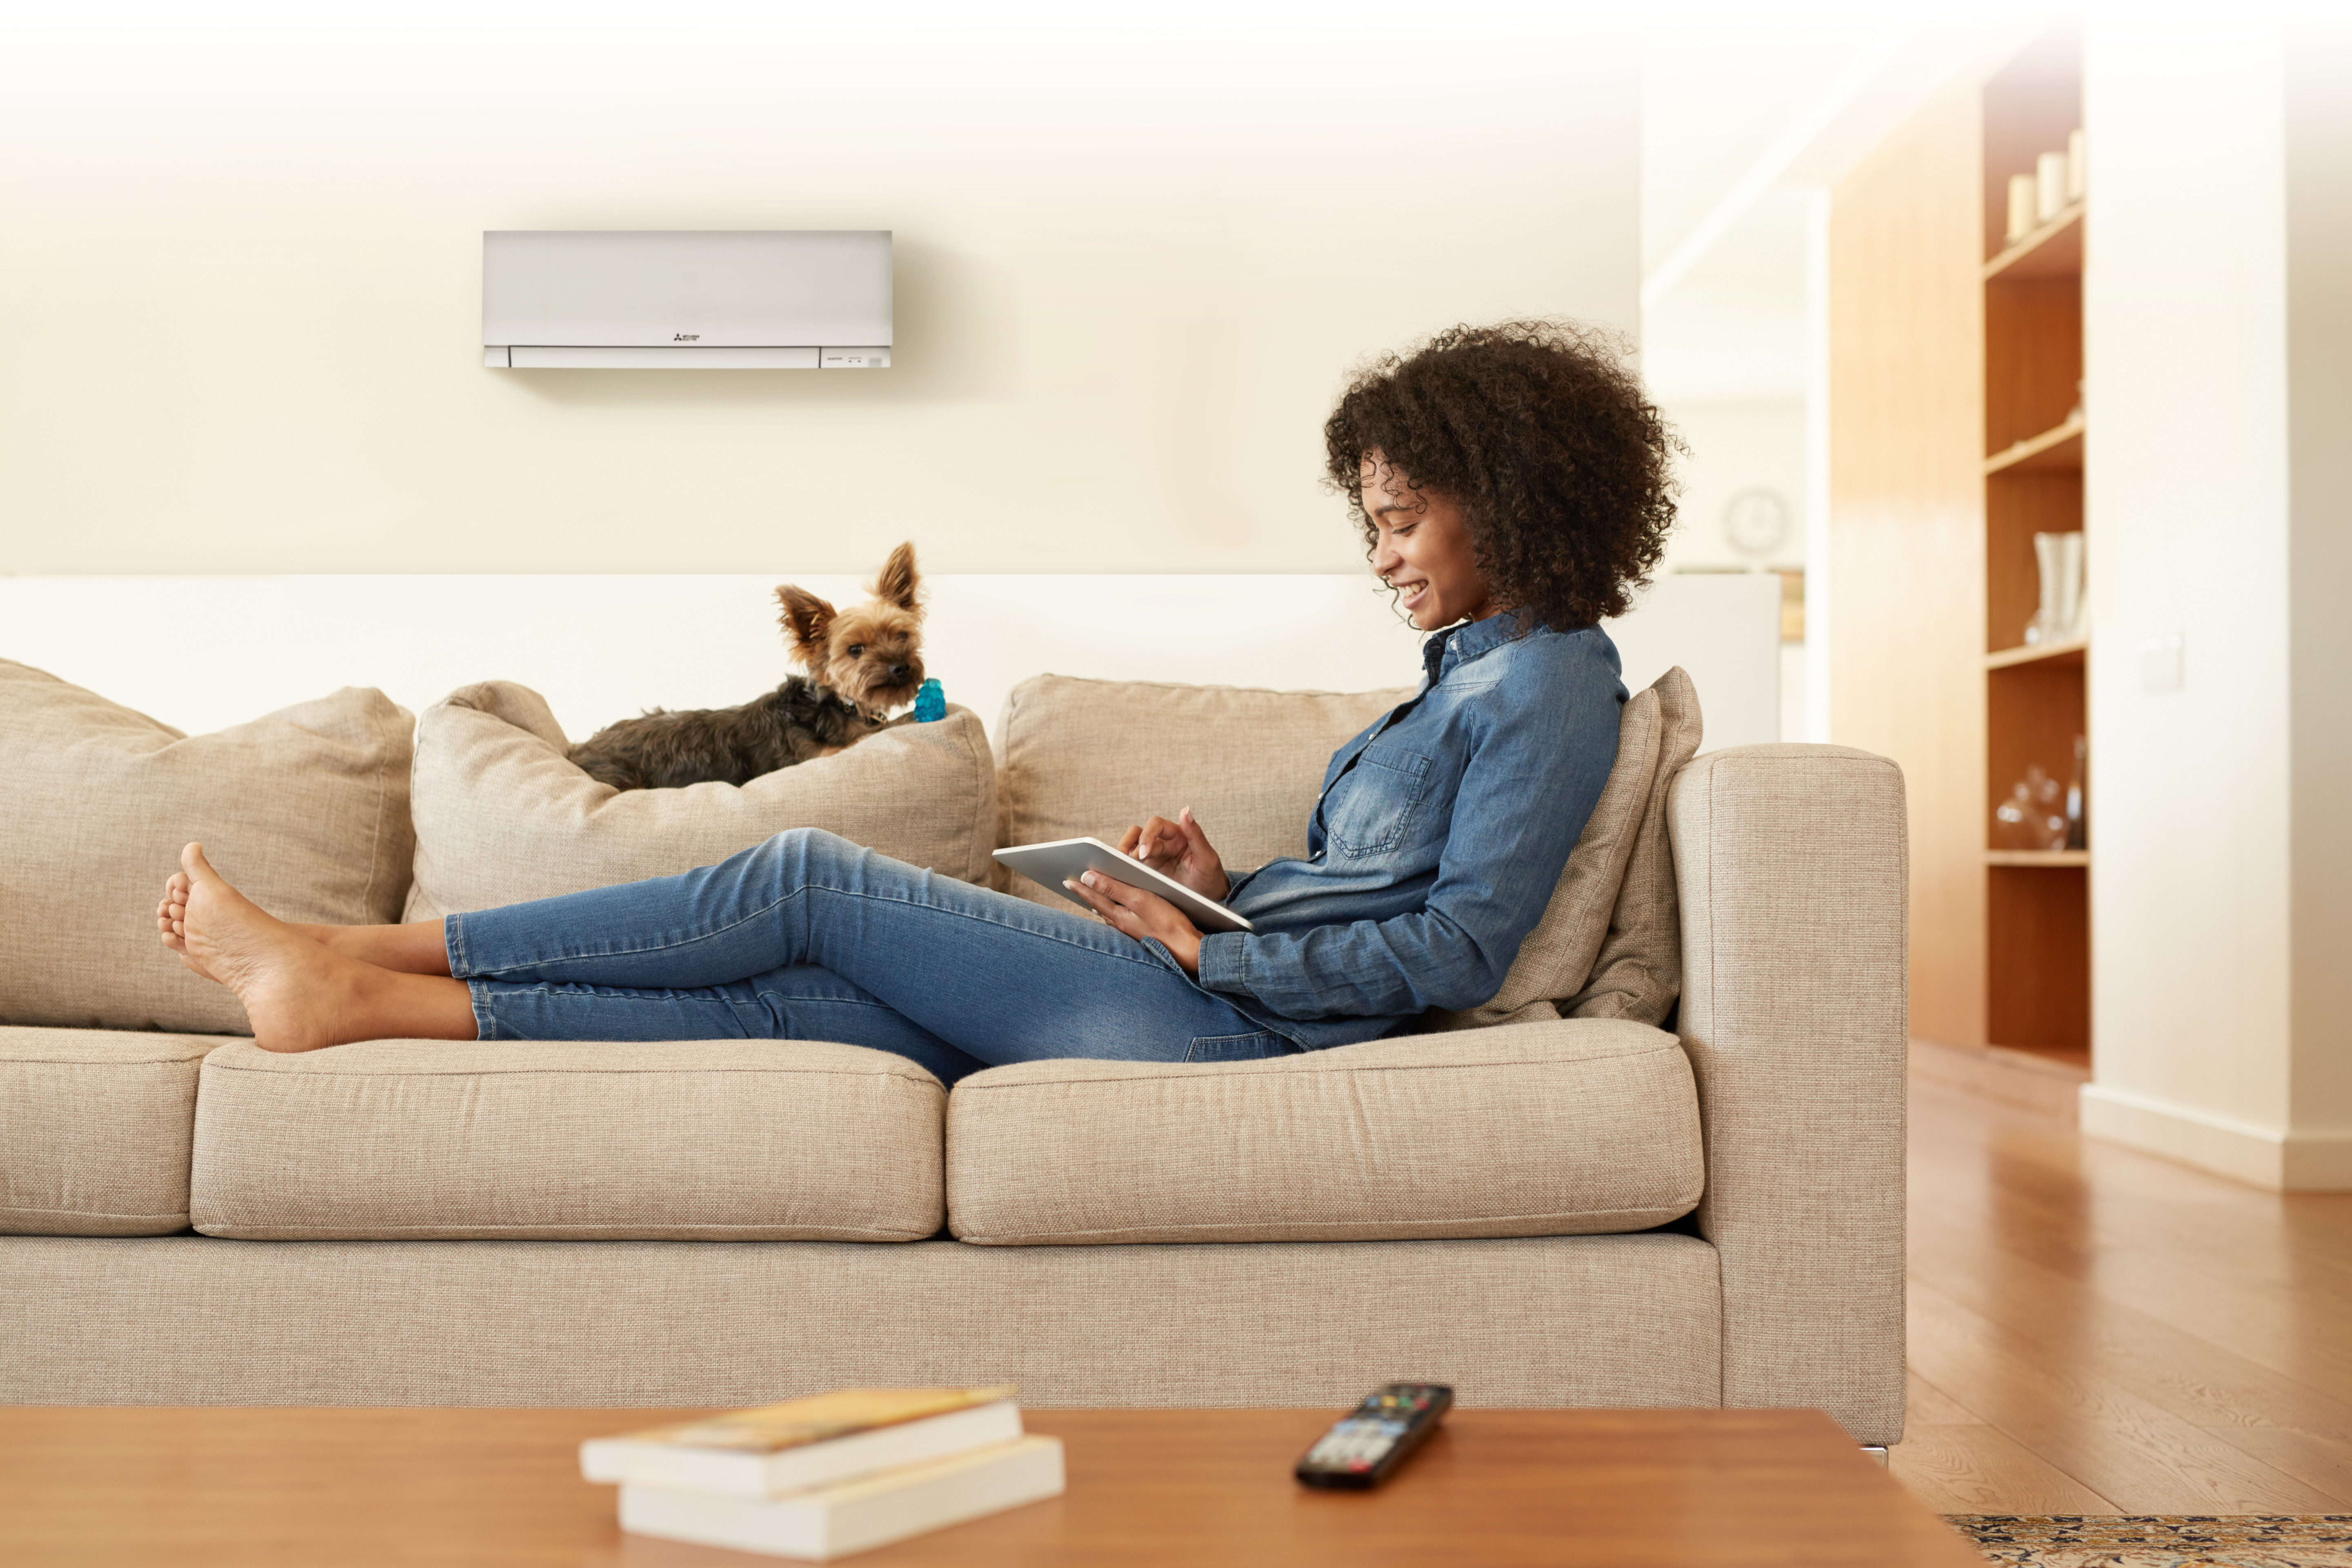 Embrace Shoulder Season with All-Electric Heat Pumps